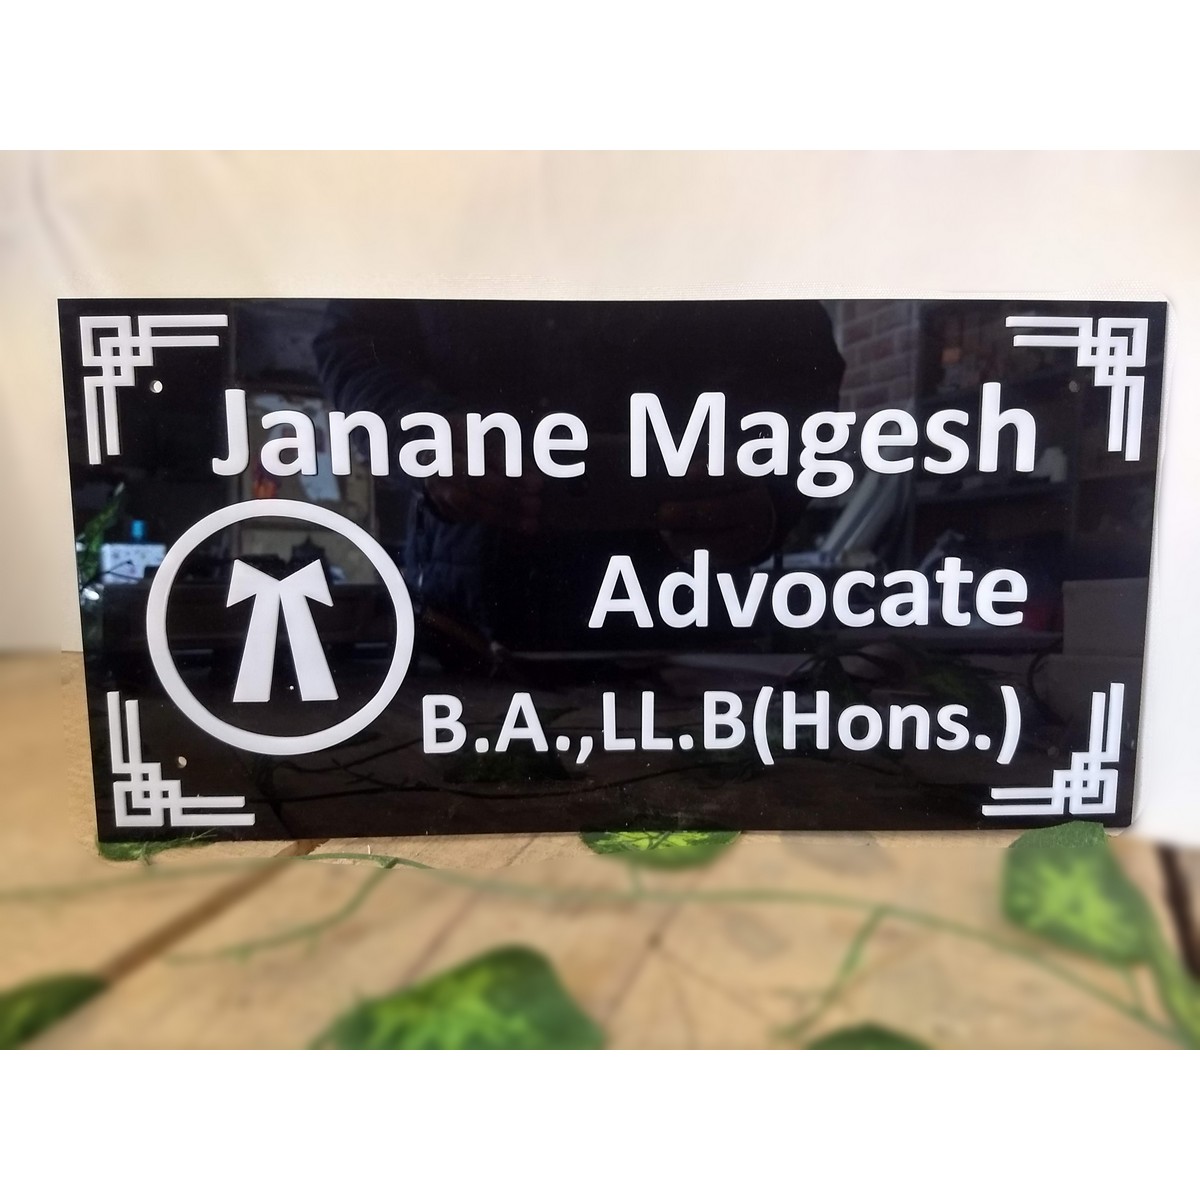 Advocate Acrylic Name Plate  New Design  Advocate Acrylic Name Plate  New Design